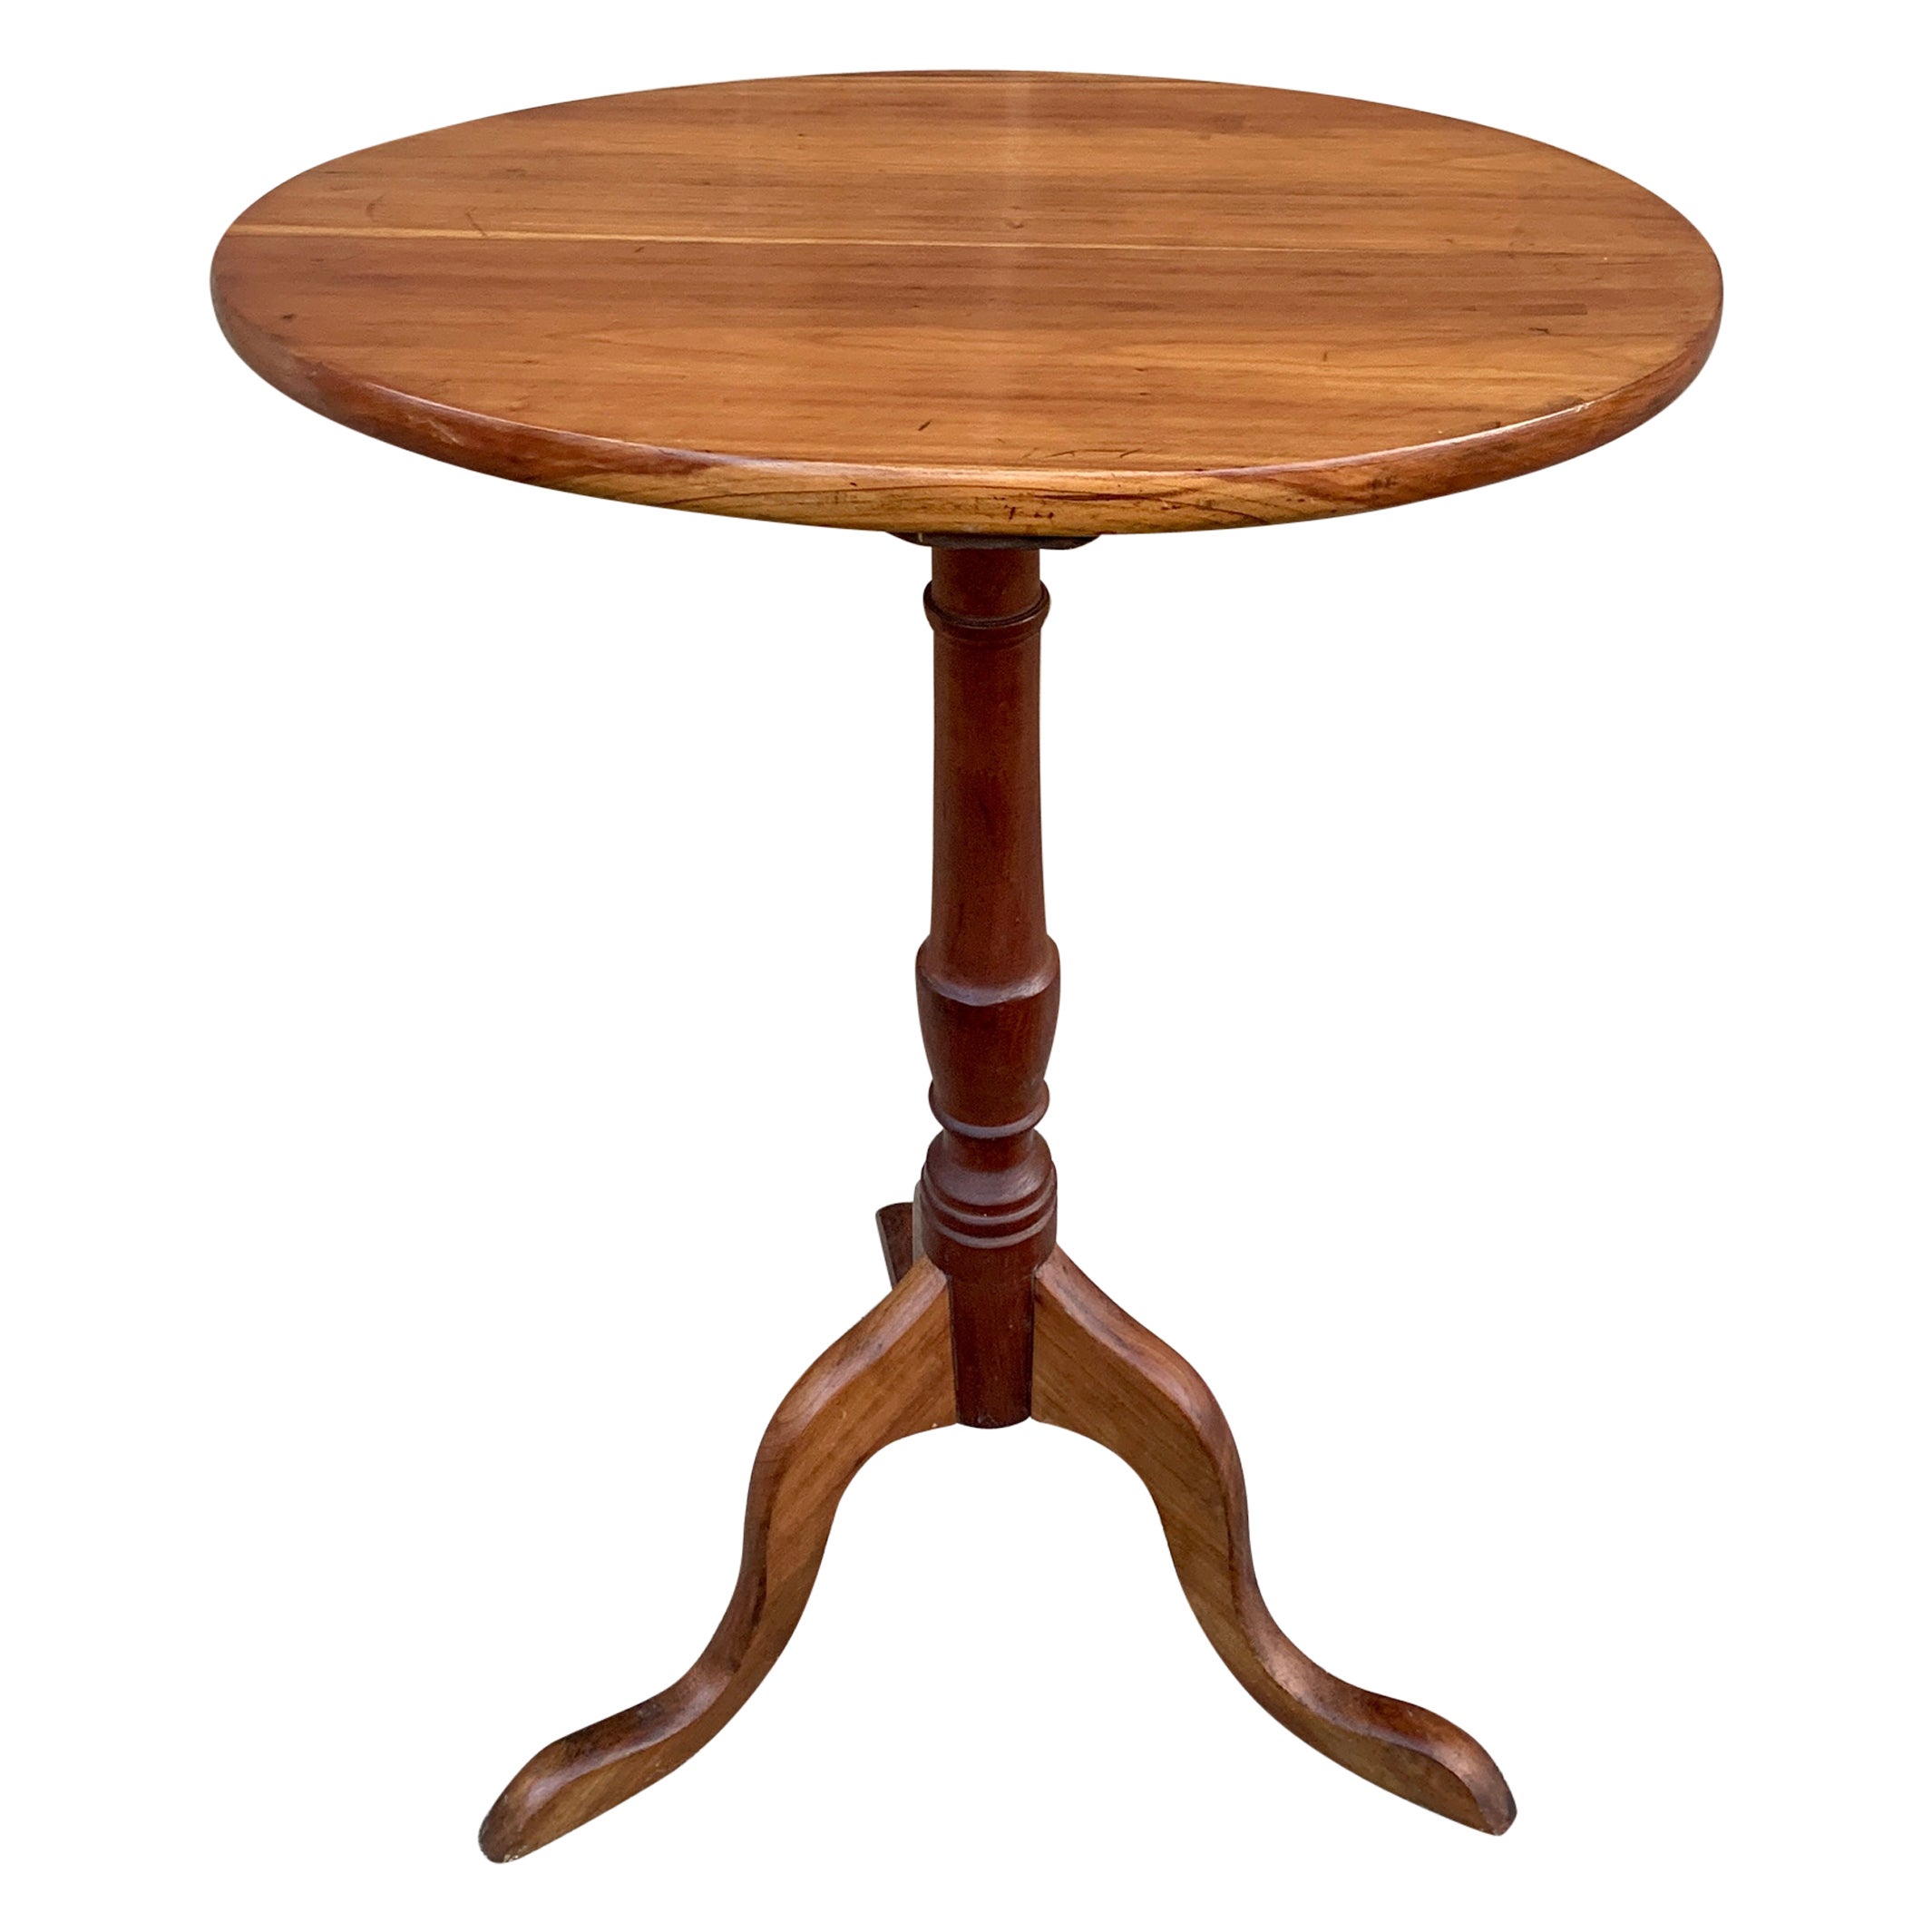 Antique American Colonial Cherry Candle Stand or Side Table, Mid 19th Century For Sale